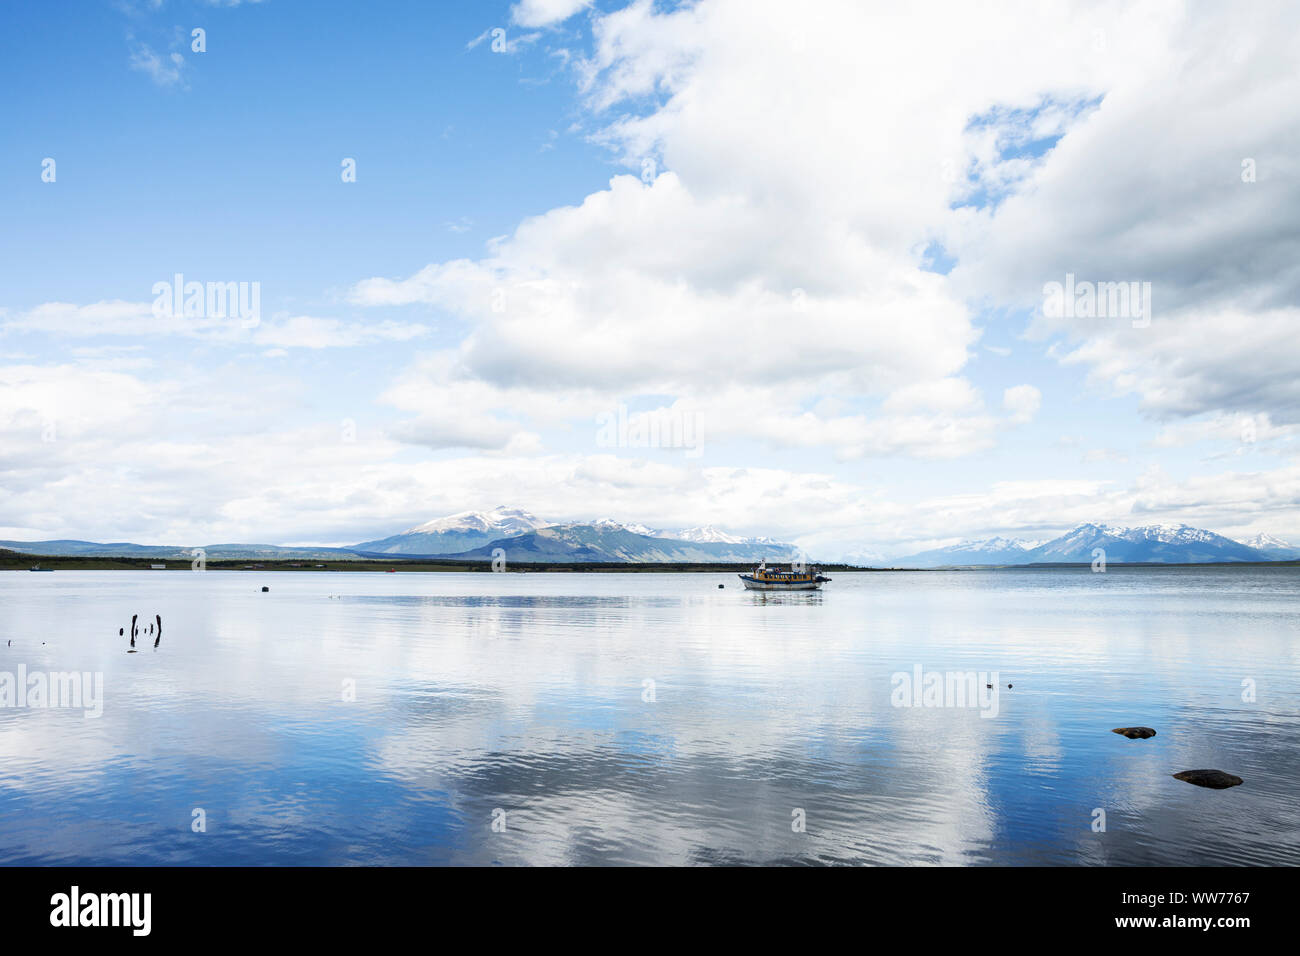 Chile, Patagonia, Puerto Natales, fjord Stock Photo